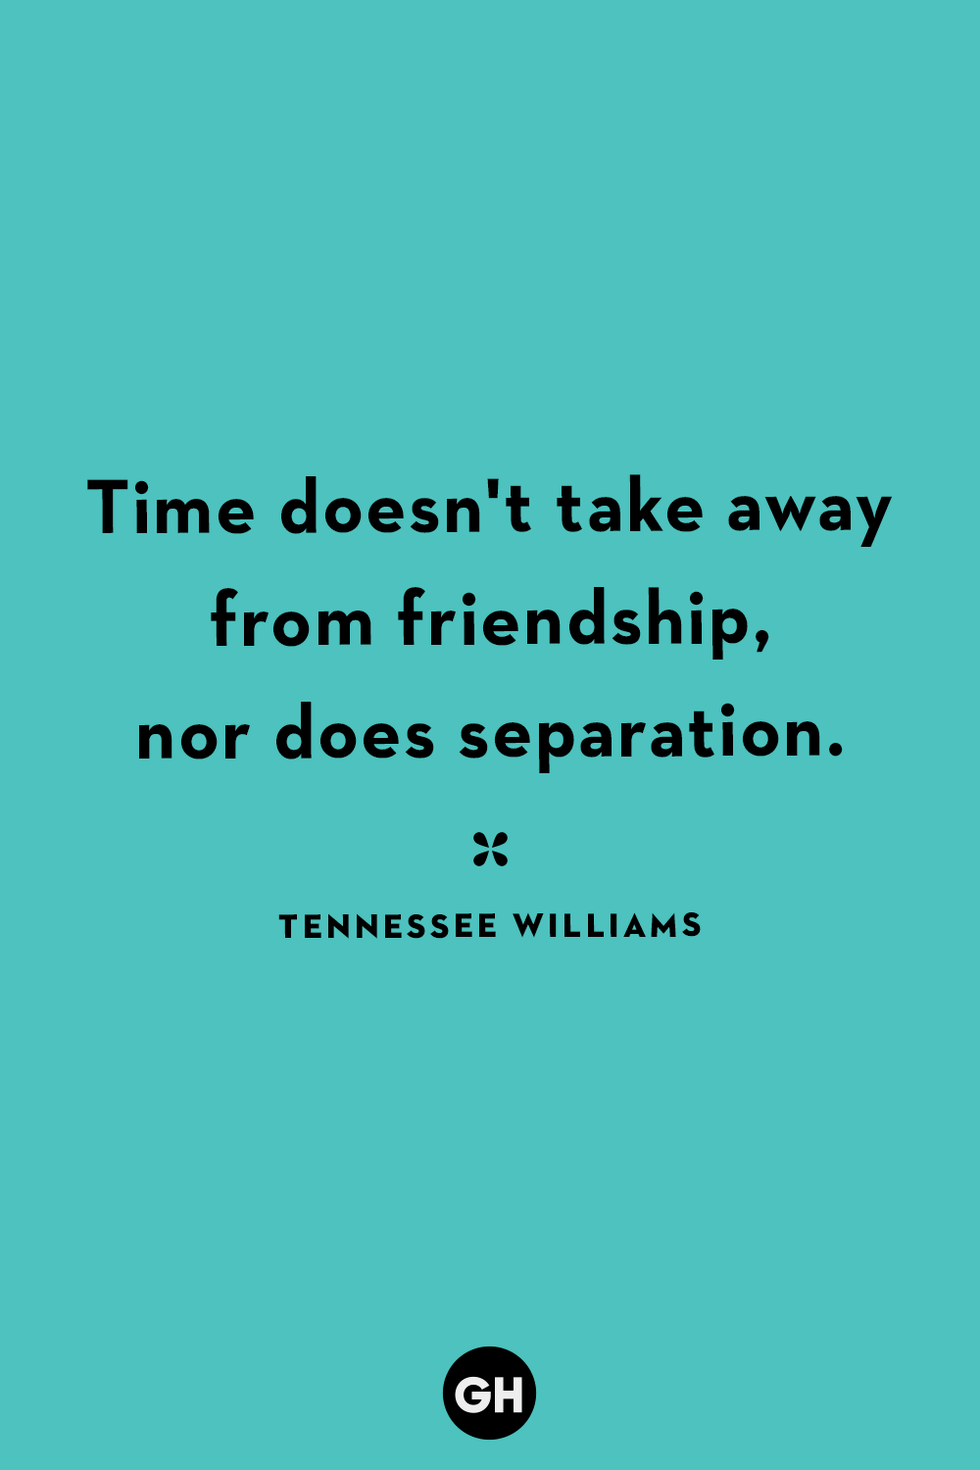 https://hips.hearstapps.com/hmg-prod/images/gh-friendship-quotes-tennessee-williams-6449369159134.png?crop=1xw:1xh;center,top&resize=980:*